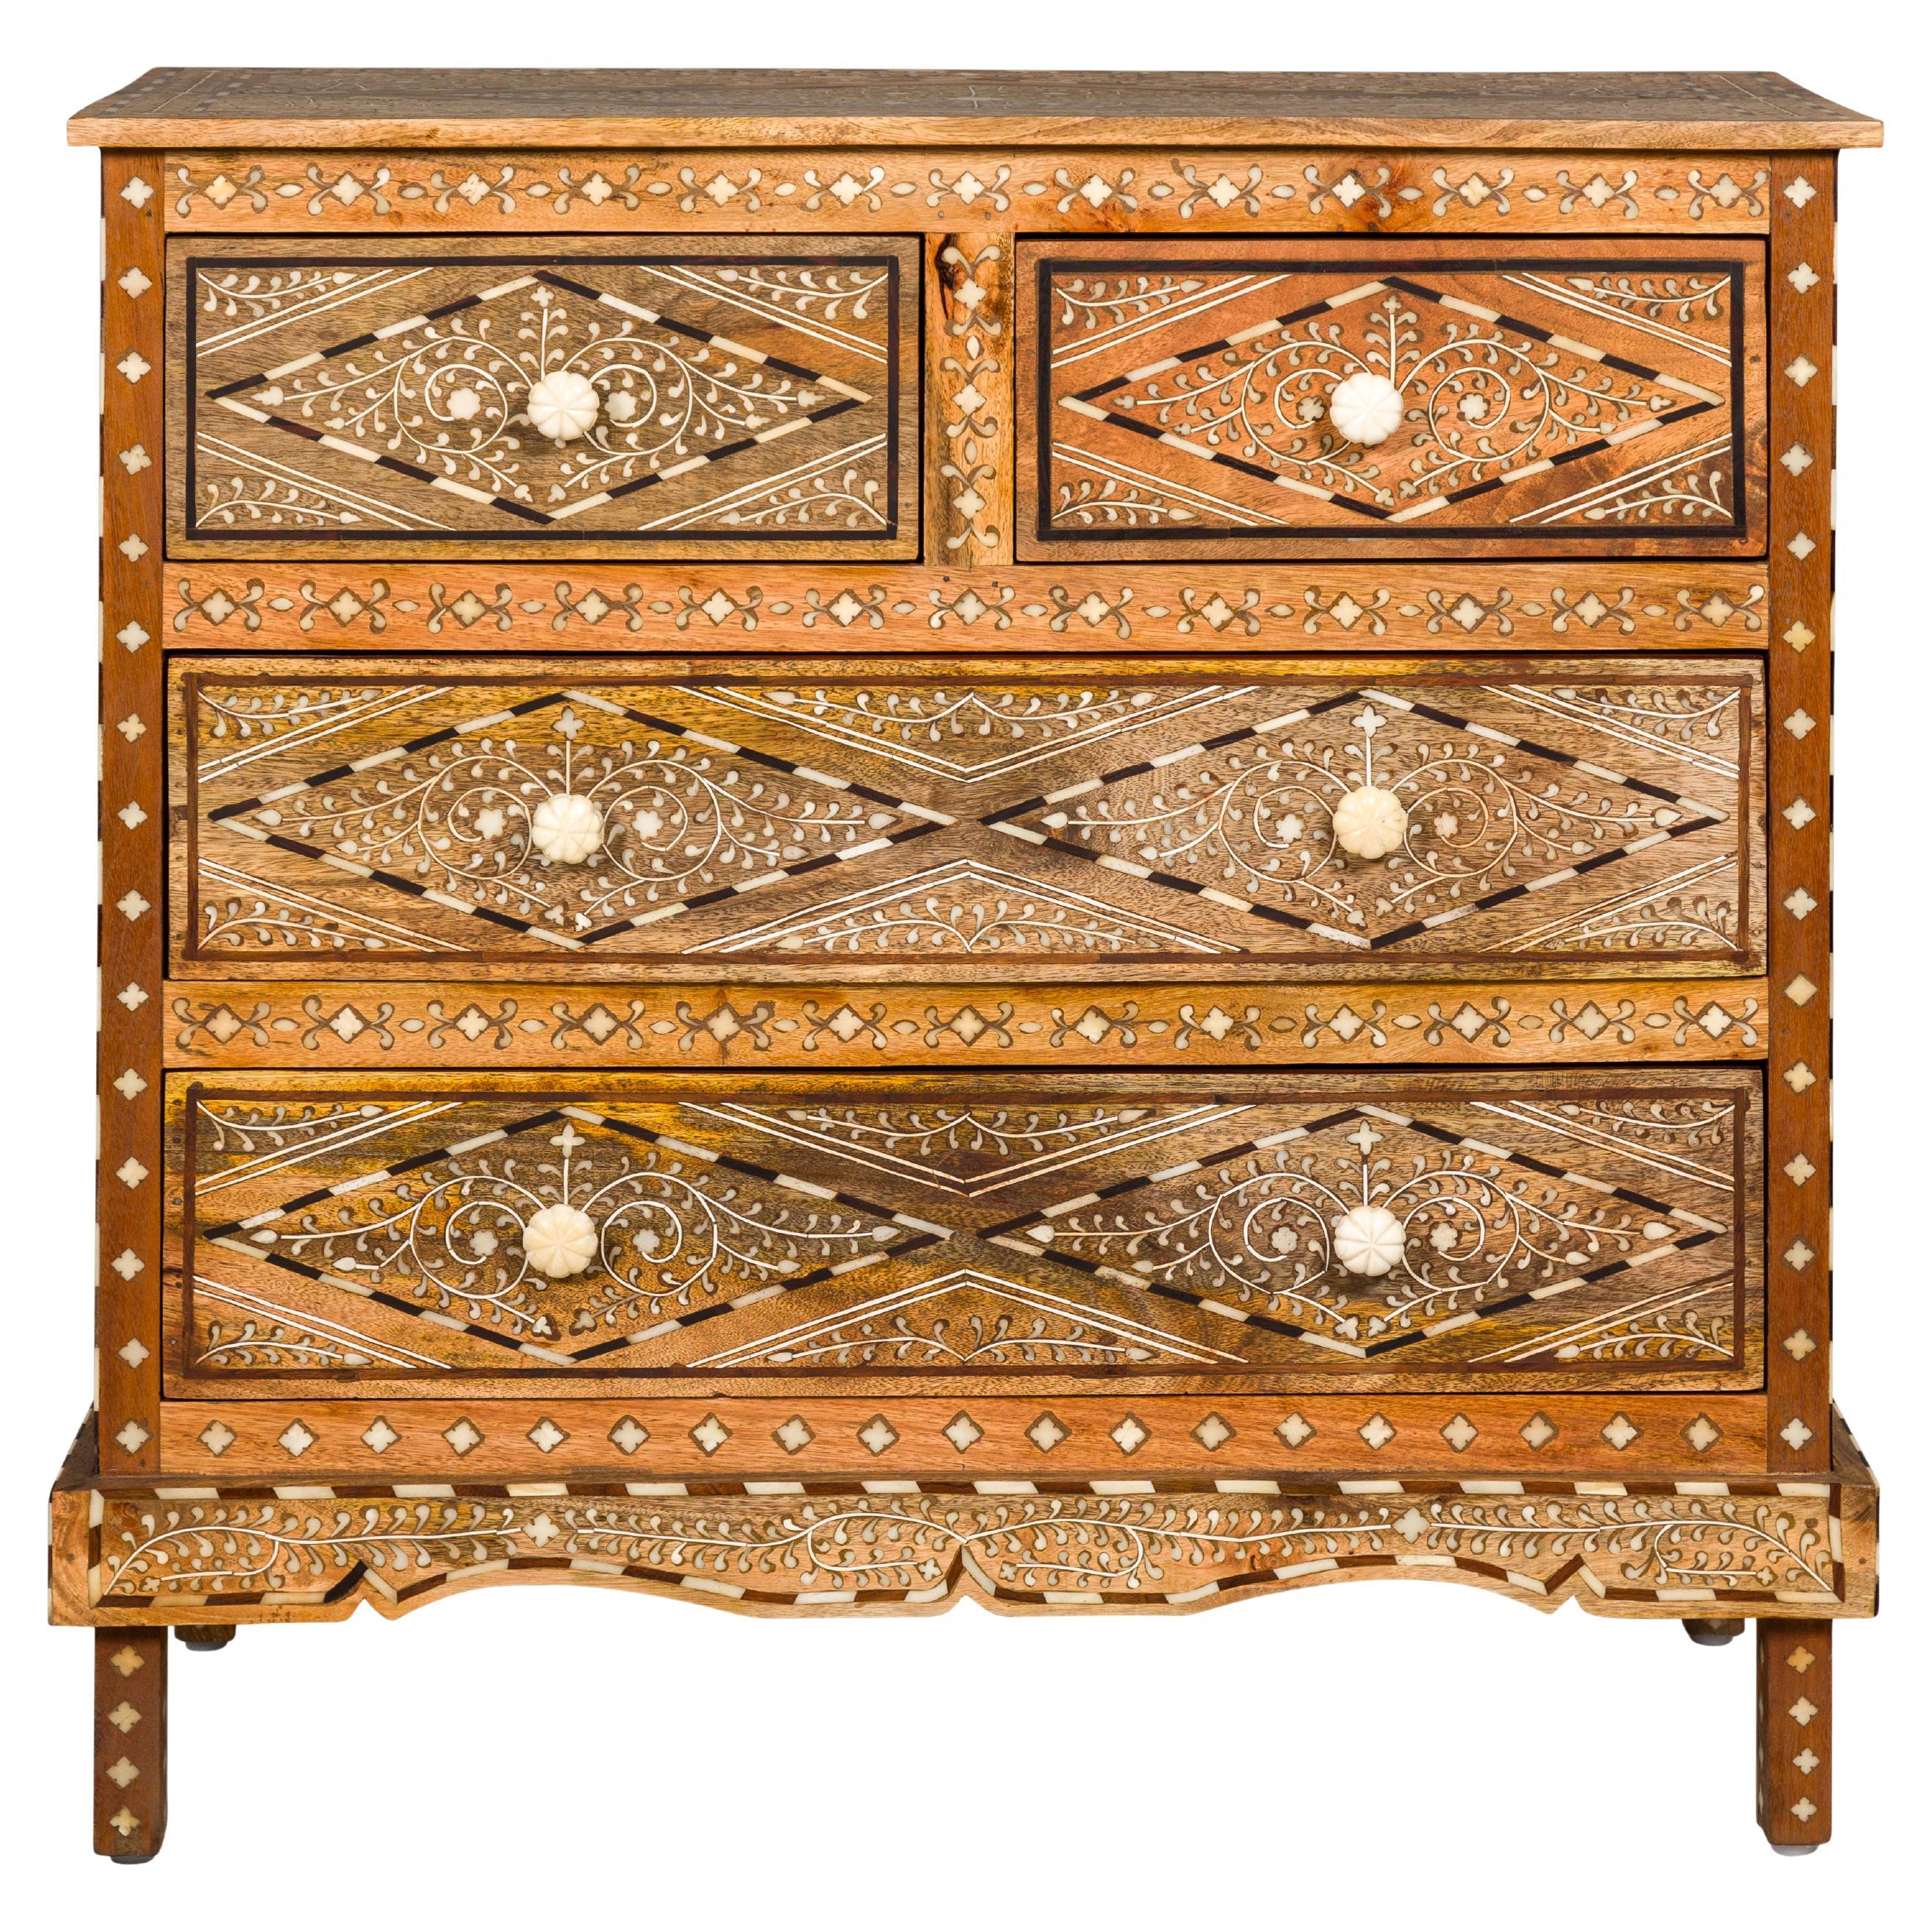 Anglo-Indian Style Mango Wood Four-Drawer Chest with Foliage Themed Bone Inlay For Sale